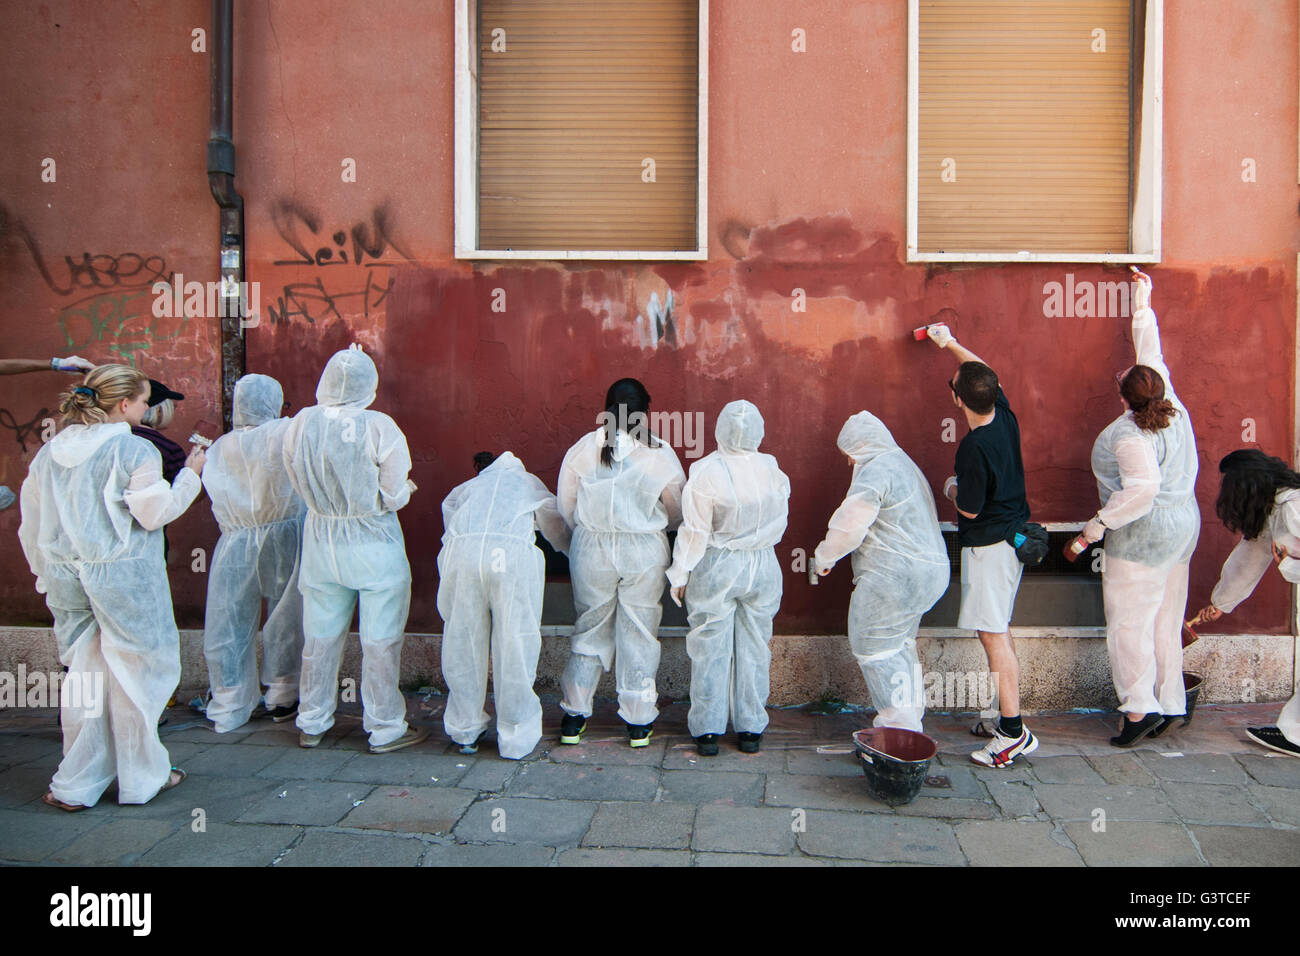 Venice, Italy. 15th June, 2016.  American students clean and paint a wall on June 15, 2016 in Venice, Italy. The association 'Masegni e nizioleti' is trying to clean the walls of the palaces that are ruined by graffiti, involving also some american students. HOW TO LICENCE THIS PICTURE: please contact us via e-mail at sales@xianpix.com or call  44 (0)207 1939846 for prices and terms of copyright. First Use Only, Editorial Use Only, All repros payable, No Archiving. © Awakening/Xianpix Credit:  Massimiliano Donati/Awakening/Alamy Live News Stock Photo